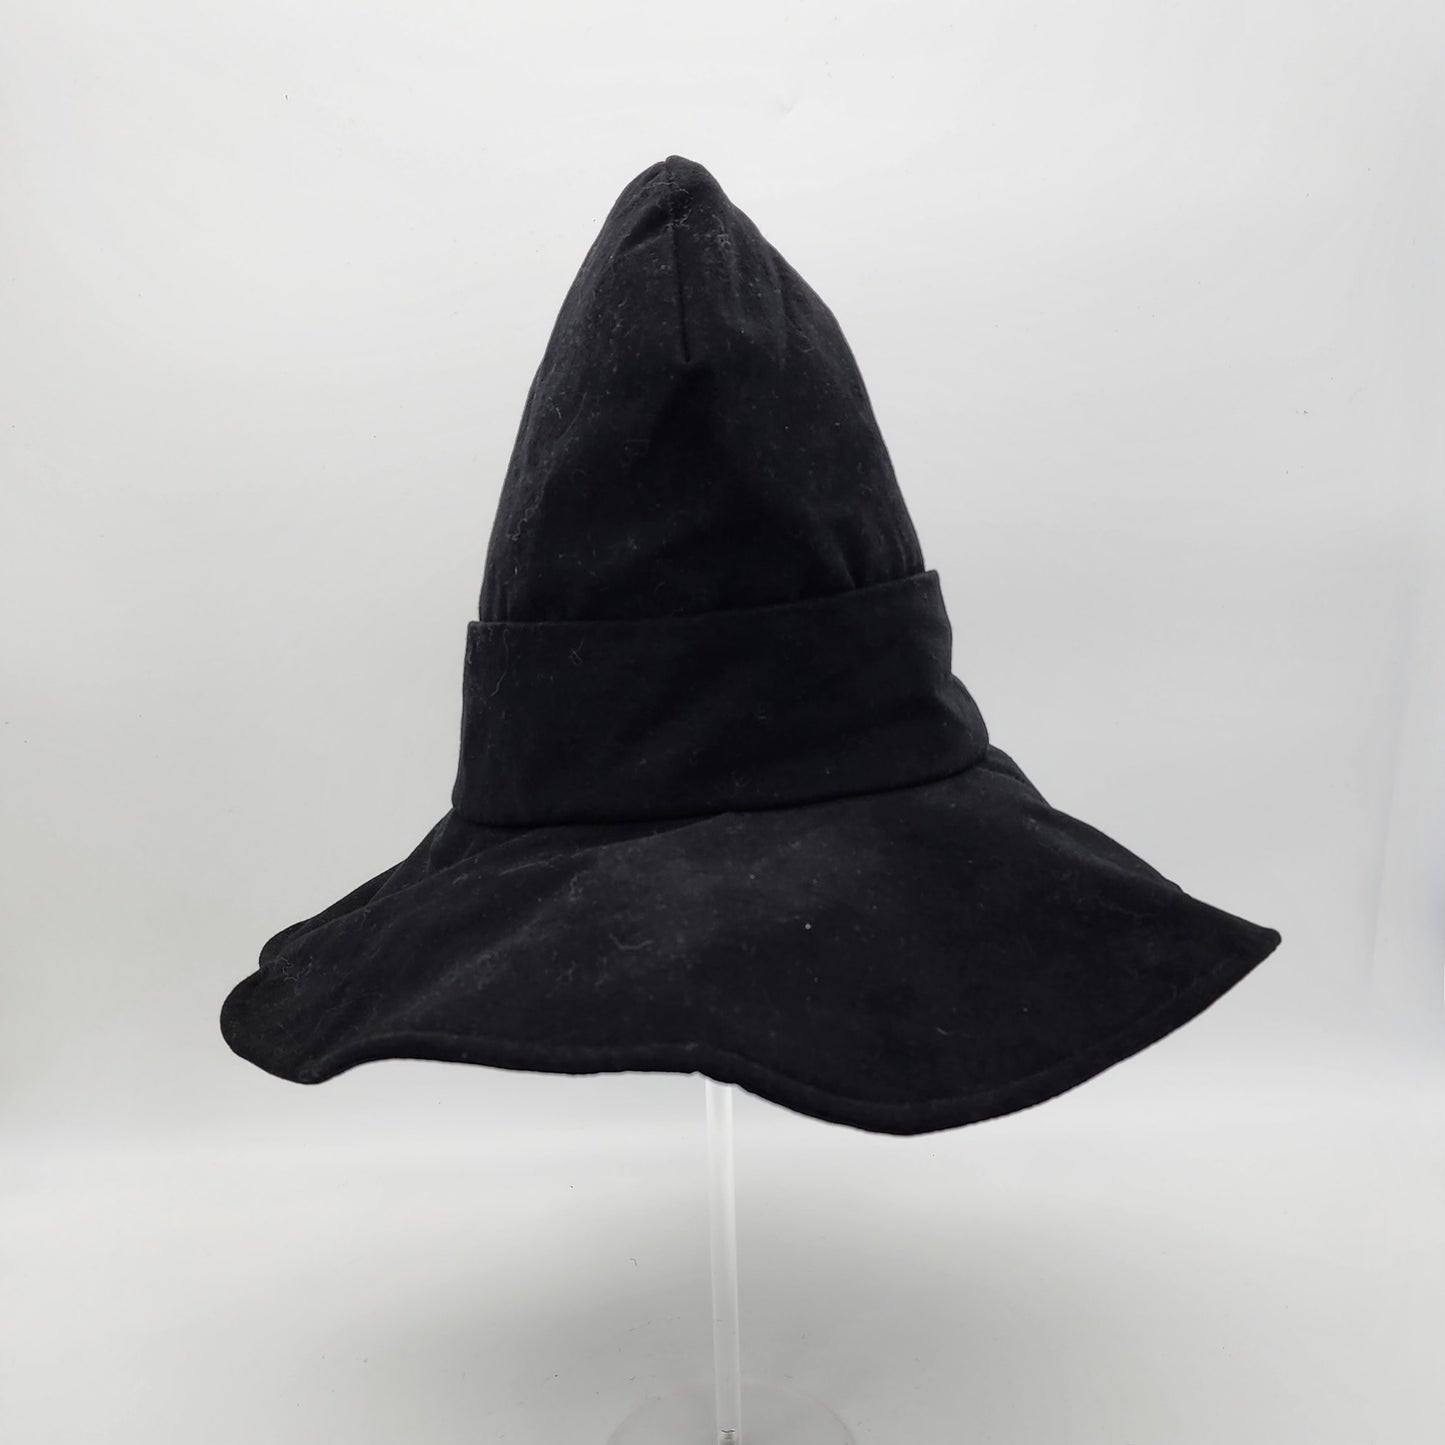 Butterfly Witch Hat- Black with Gold and White Embroidery